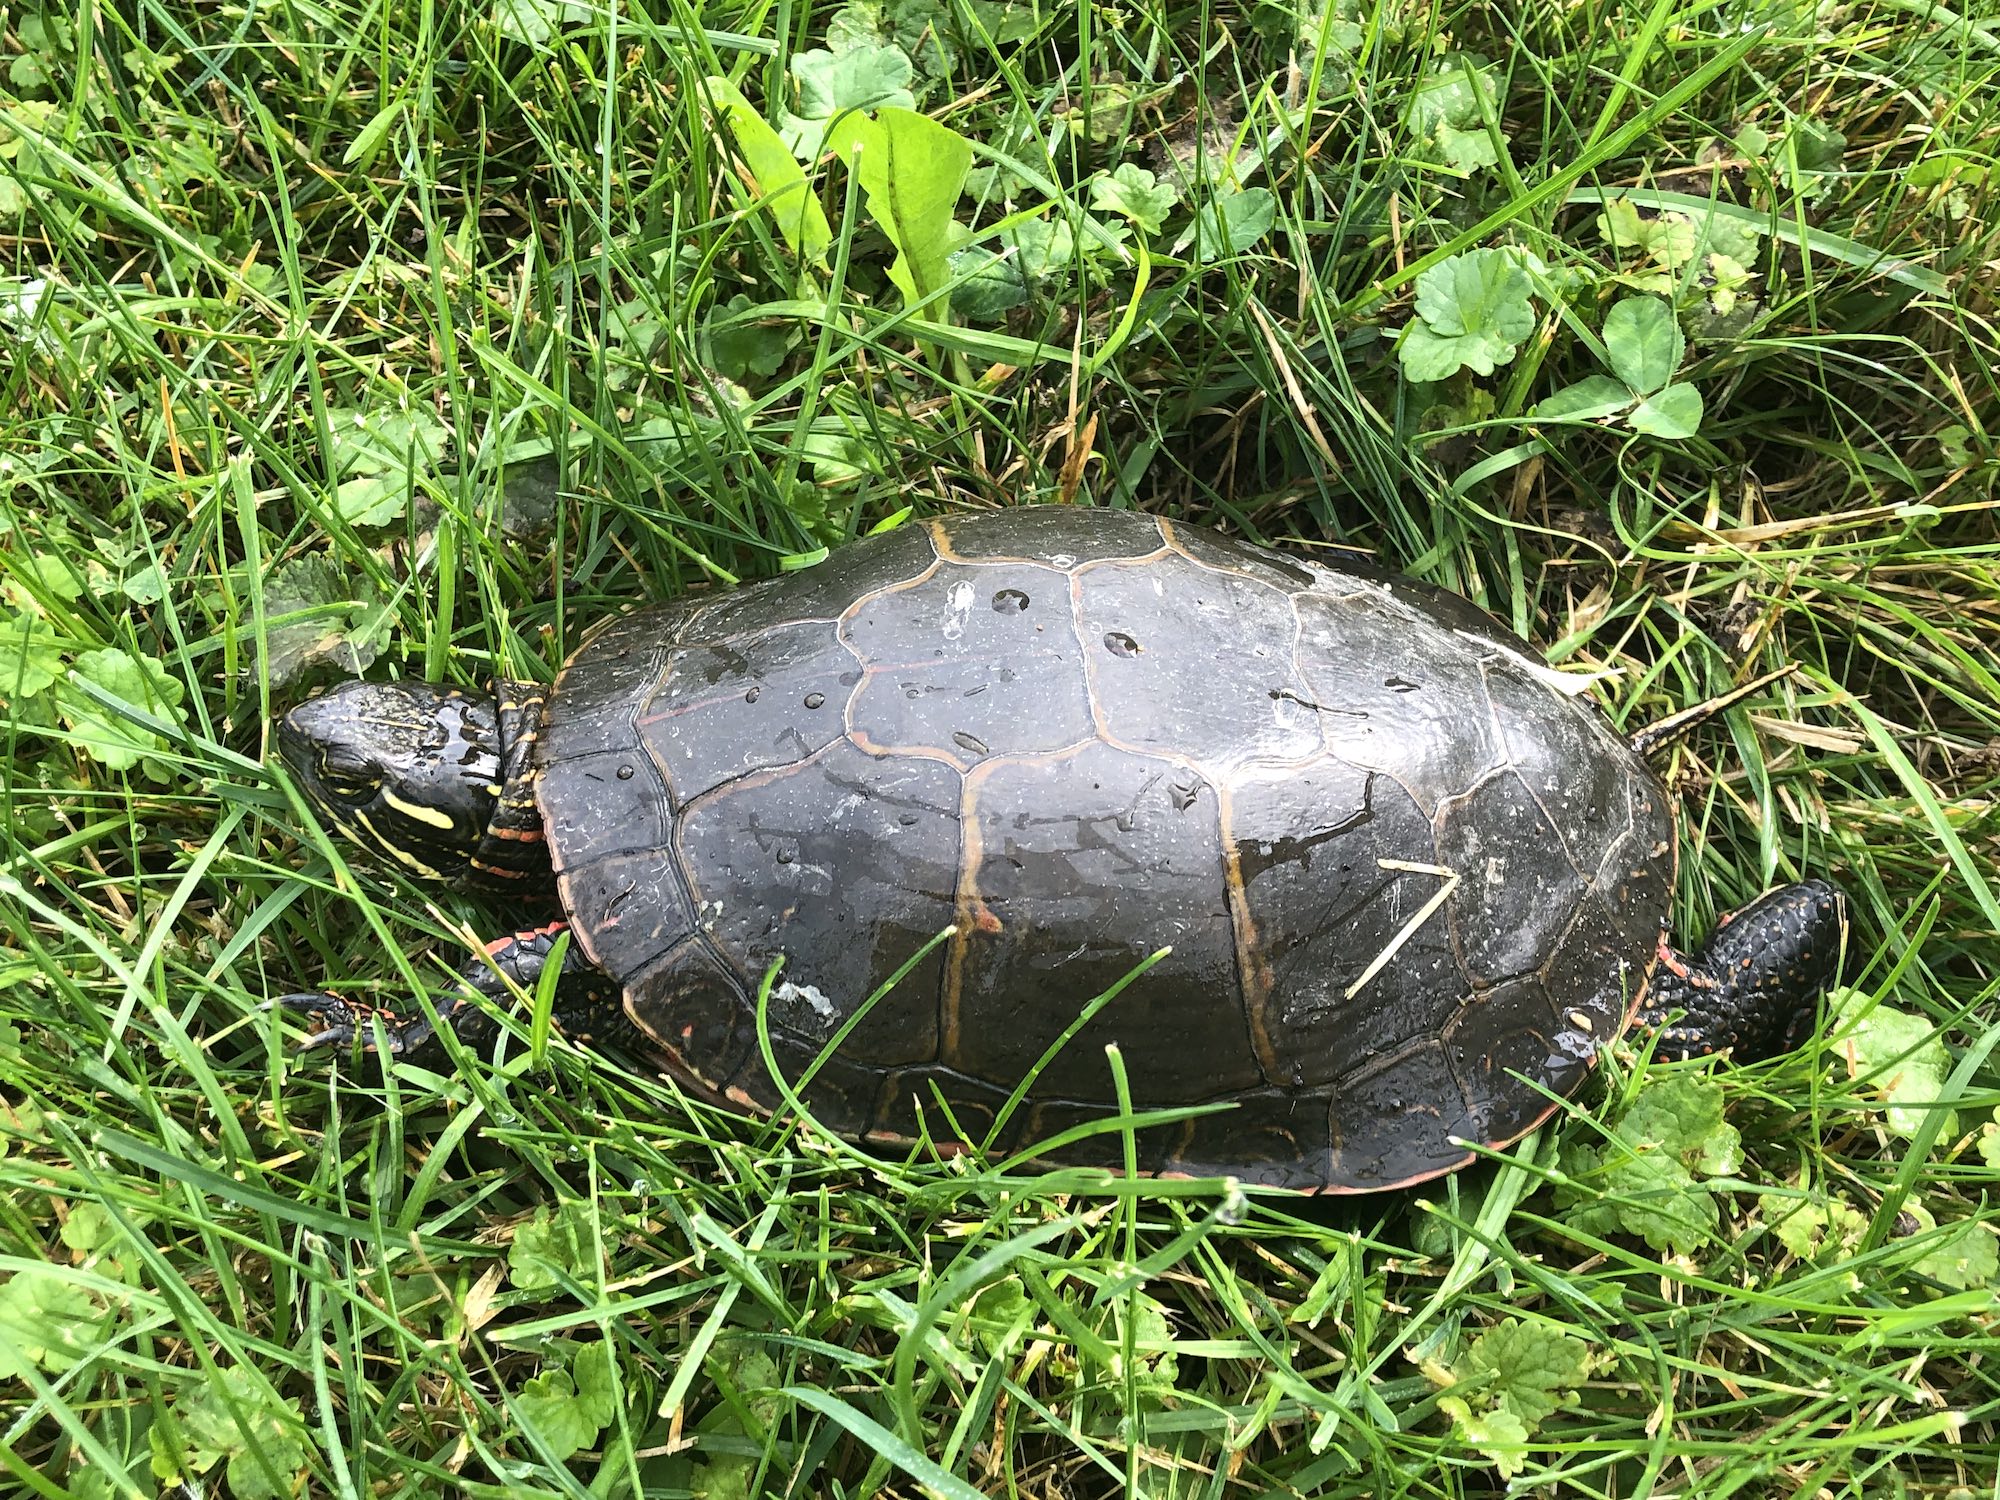 Painted Turtle in E. Ray Stevens Pond and Aquatic Gardens on corner of Manitou Way and Nakoma Road in Madison, Wisconsin on June 30, 2019.